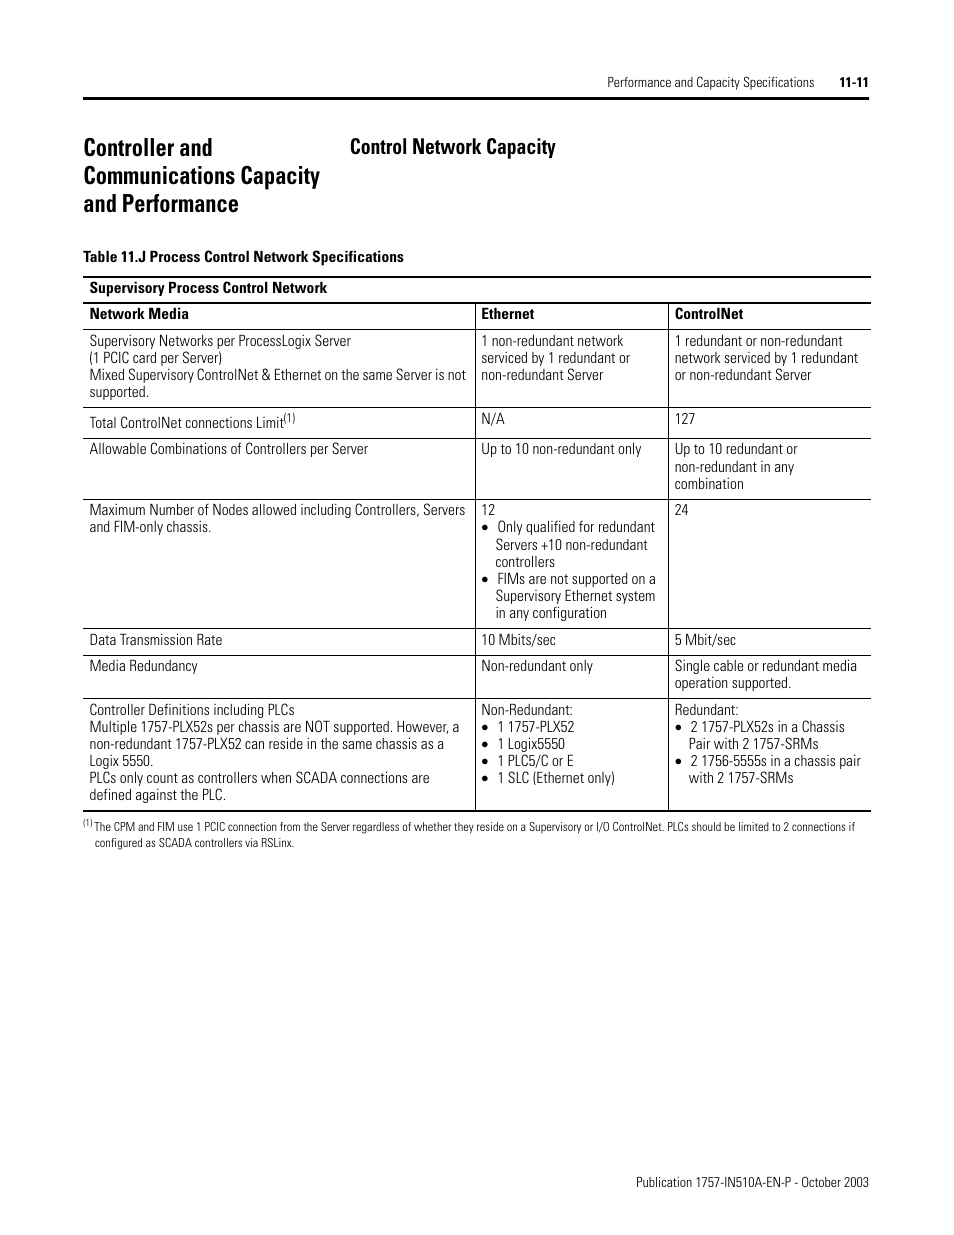 Control network capacity, Controller and communications capacity and, Performance -11 | Control network capacity -11 | Rockwell Automation 1757-SWKIT5100 ProcessLogix R510.0 Installation and Upgrade Guide User Manual | Page 251 / 271